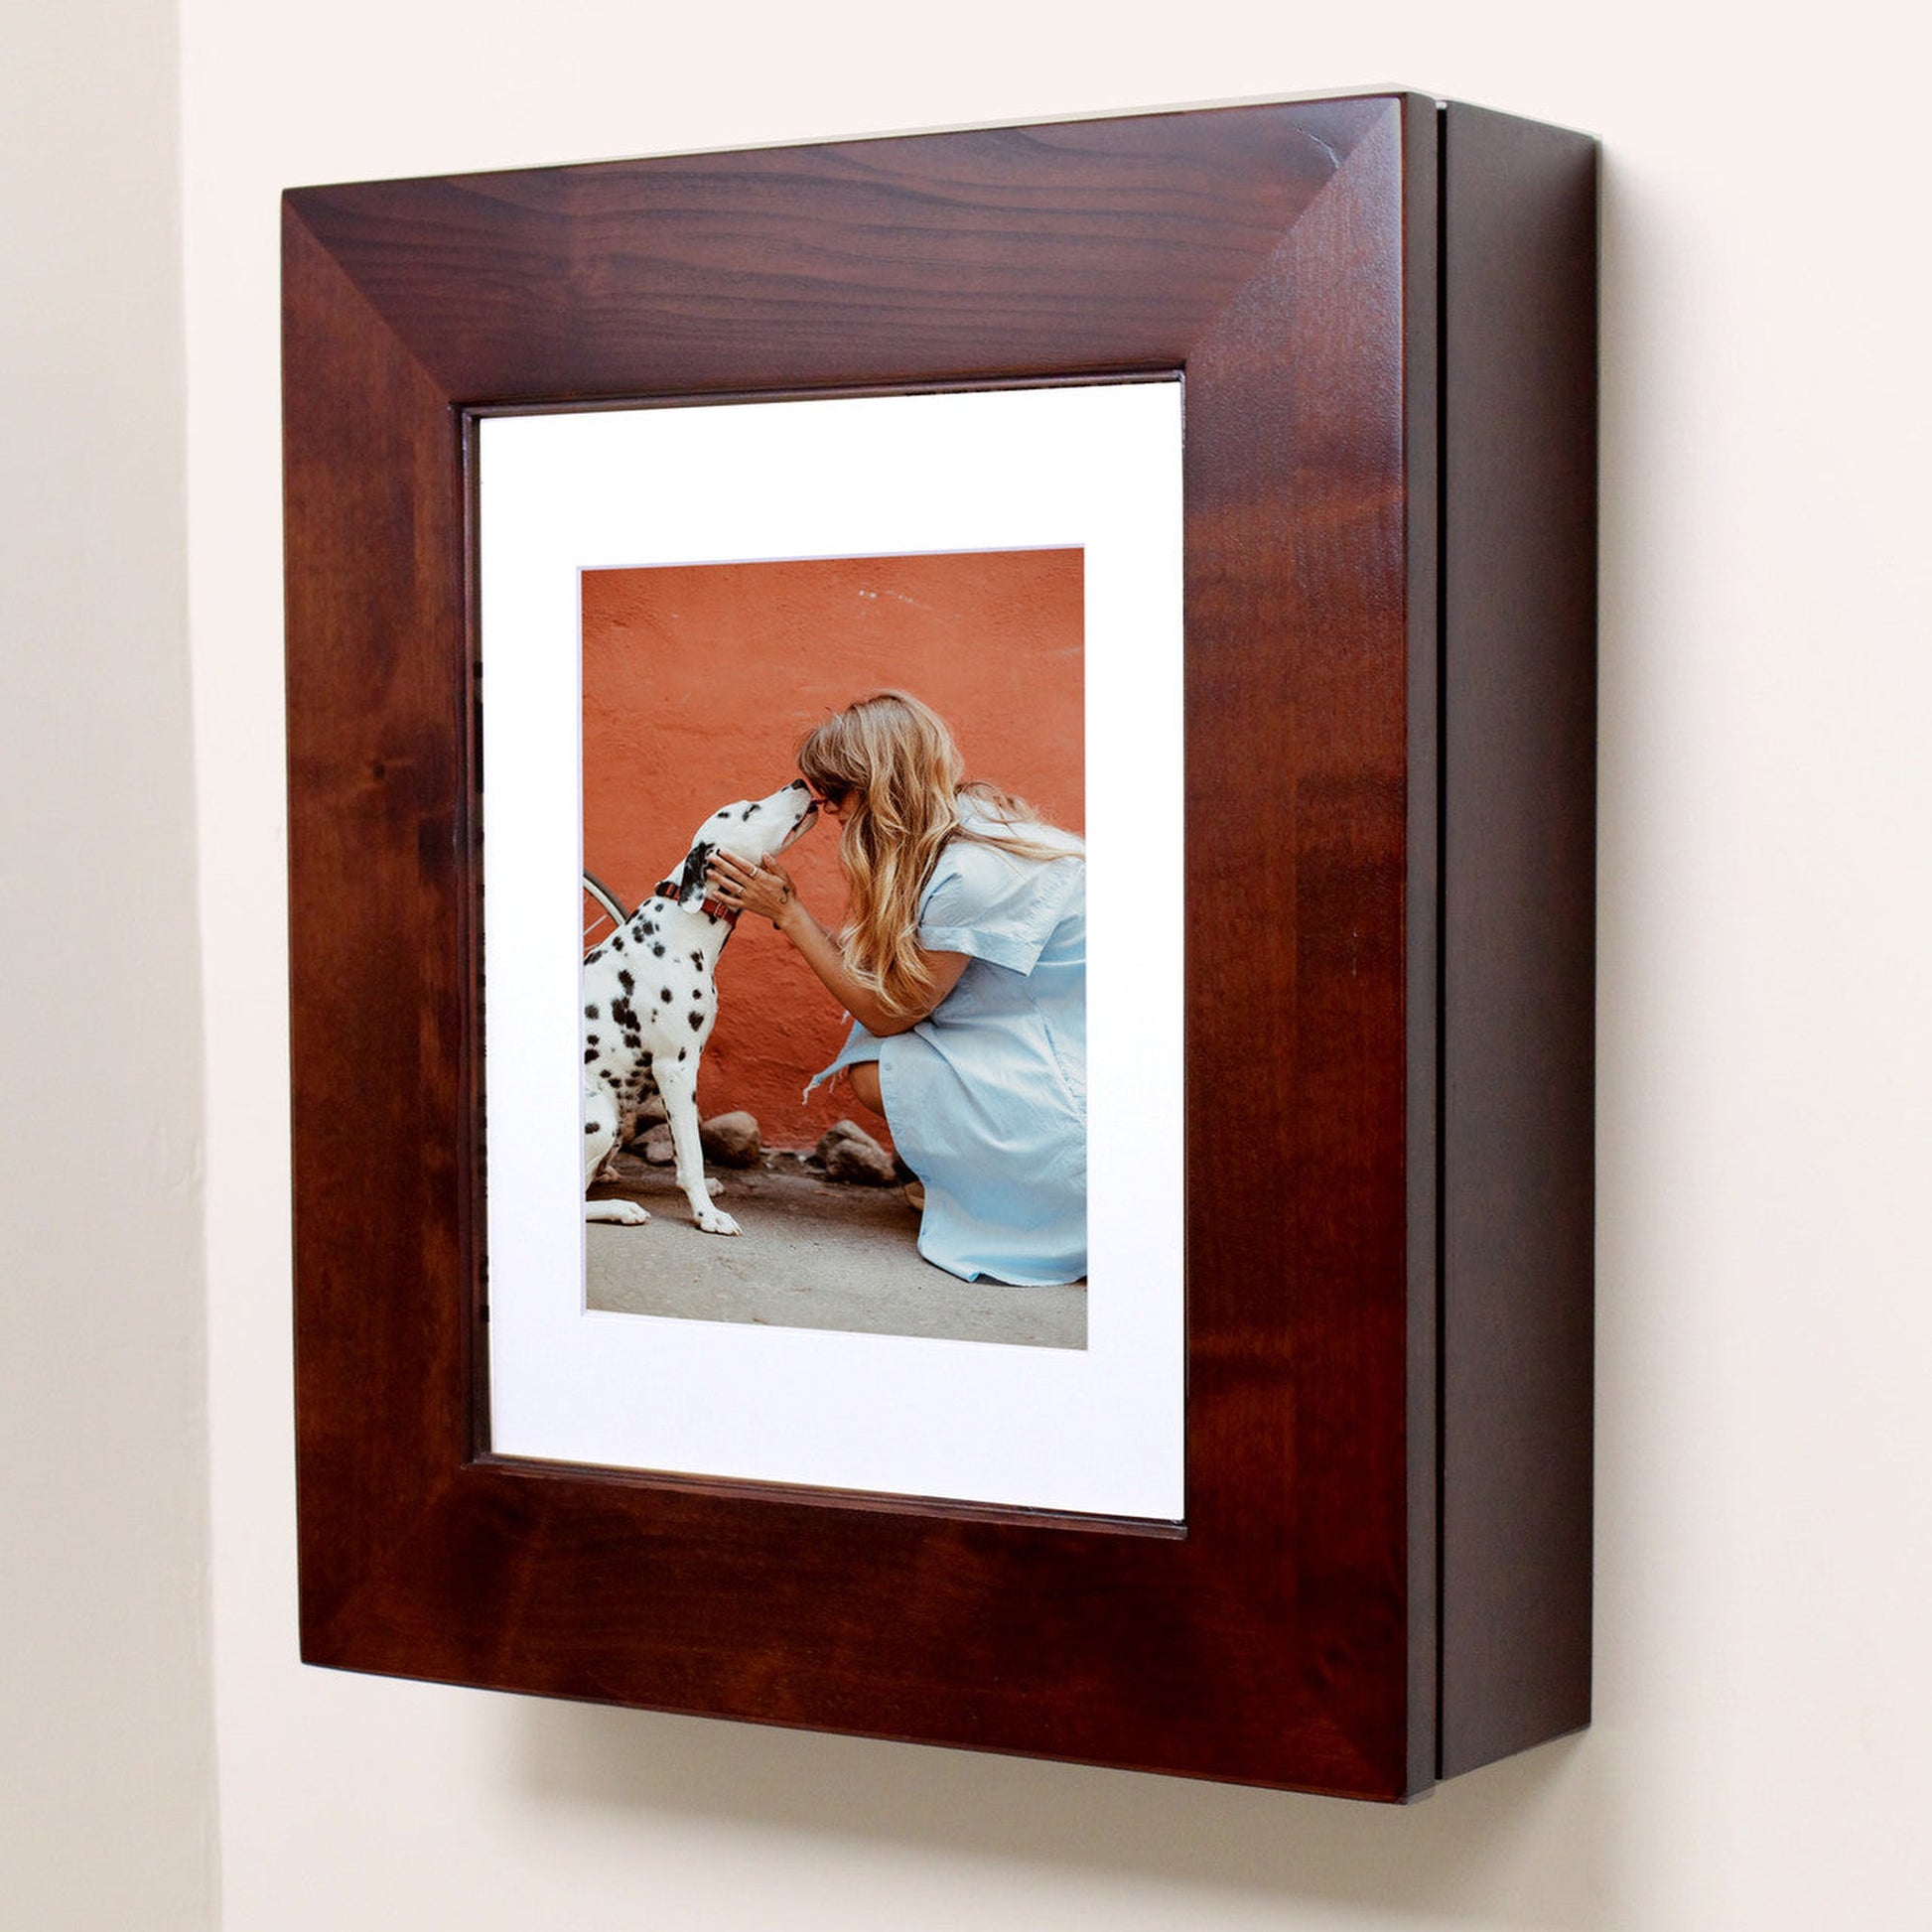 Fox Hollow Furnishings 20" x 17" Espresso Wall Mount Picture Frame Medicine Cabinet With White 8" x 10" Matting